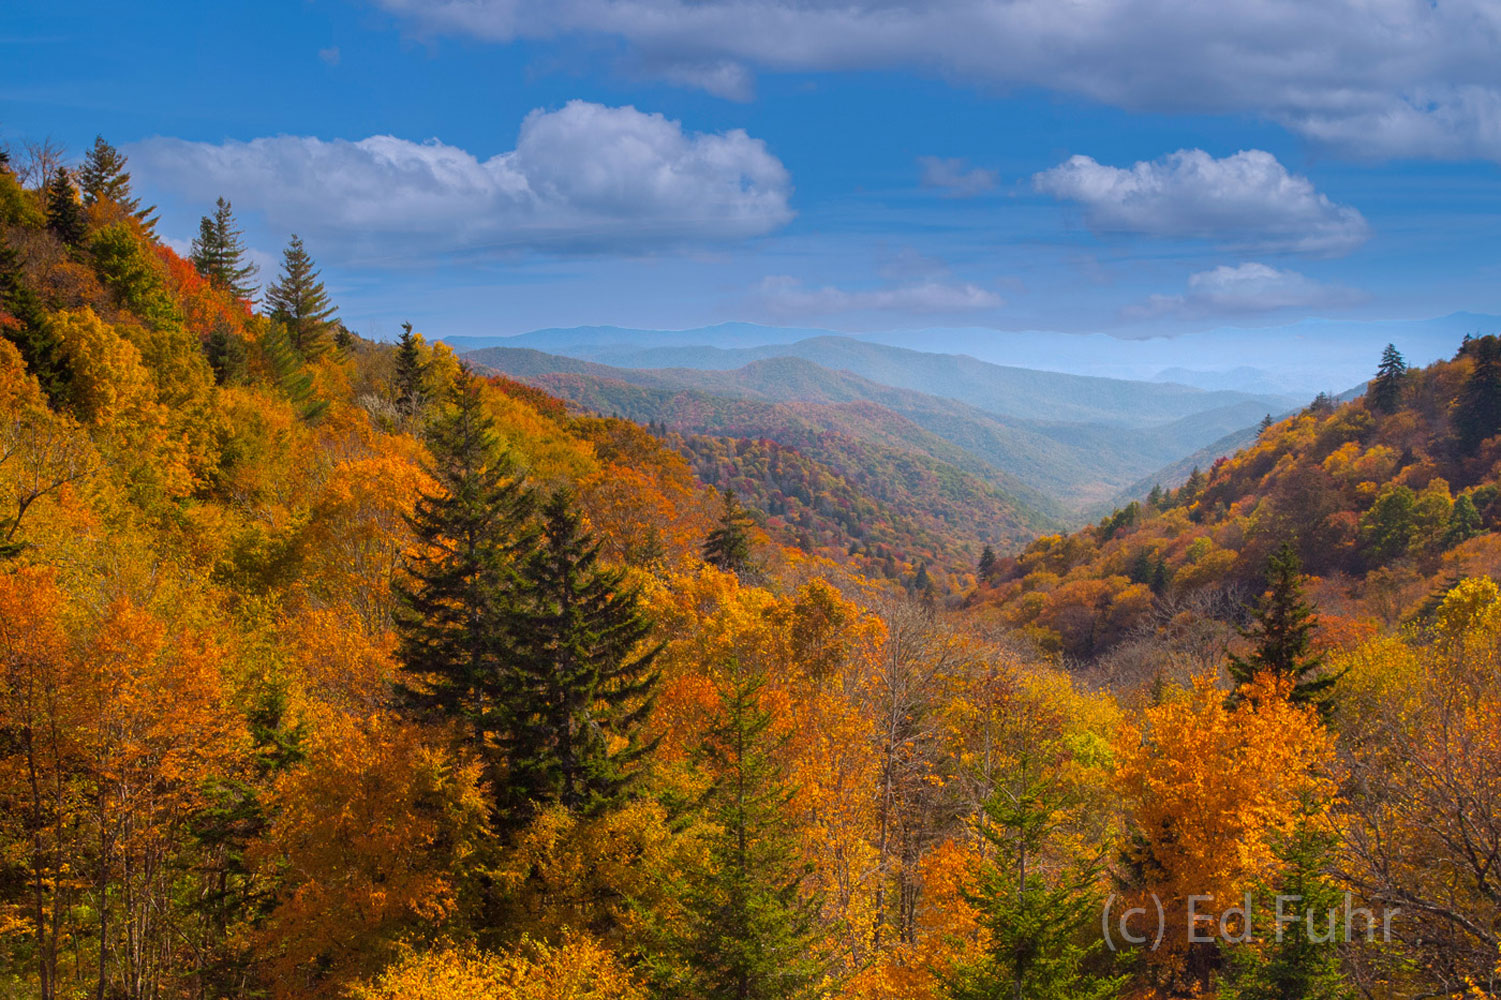 In every season Newfound Gap offers a stunning panorama to the east but perhaps no season is quite as dramatic as October when...